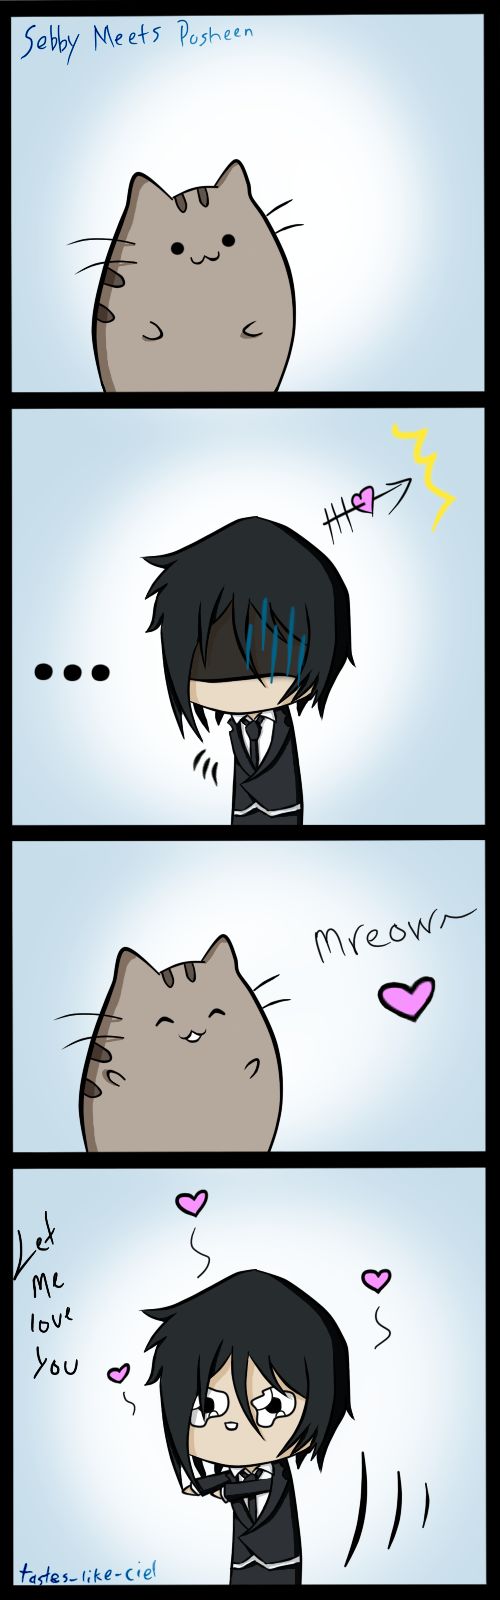 that would be his exact reaction xD except he would already be killing the cat with hugs xD